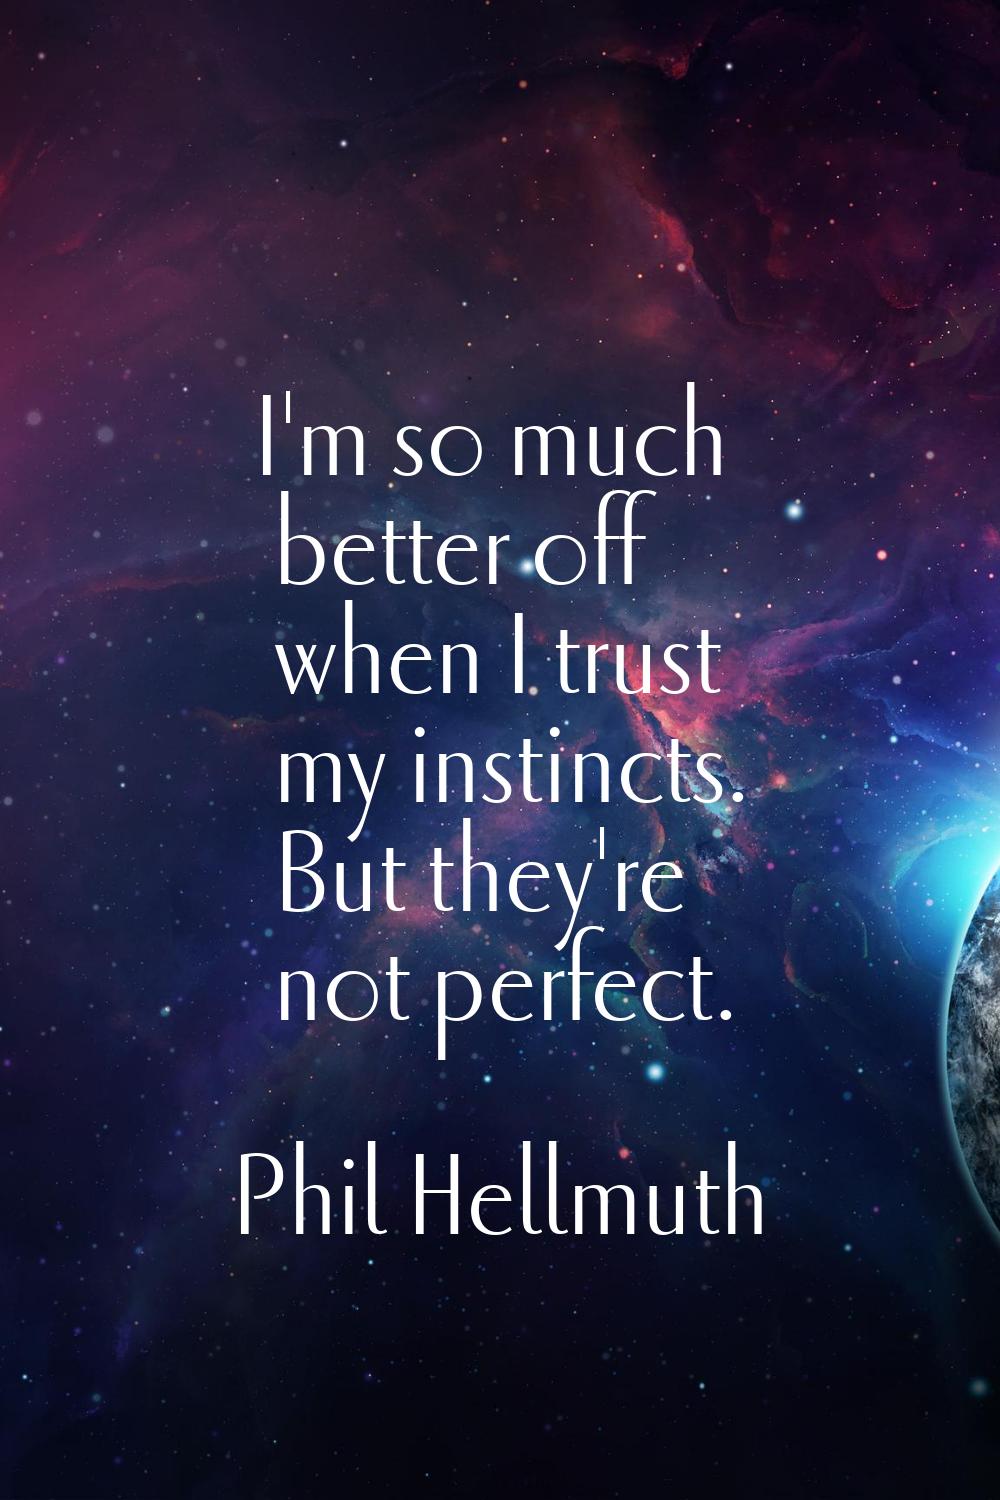 I'm so much better off when I trust my instincts. But they're not perfect.